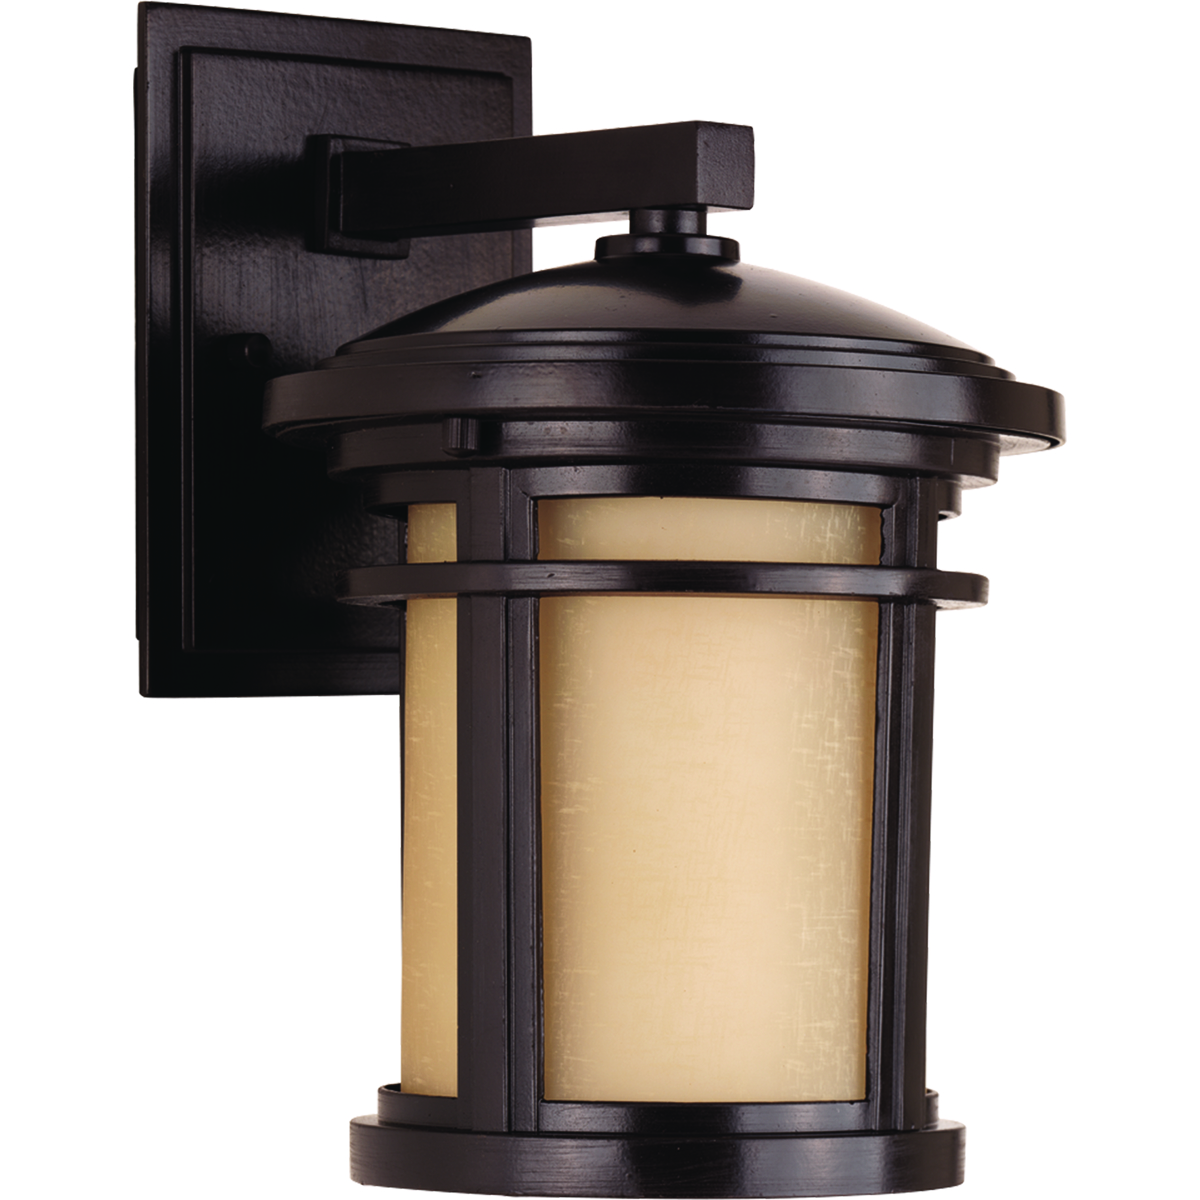 Small wall lantern with etched umber linen glass. Includes dark sky shield for full cut-off illumination or remove for a traditional lighting effect.